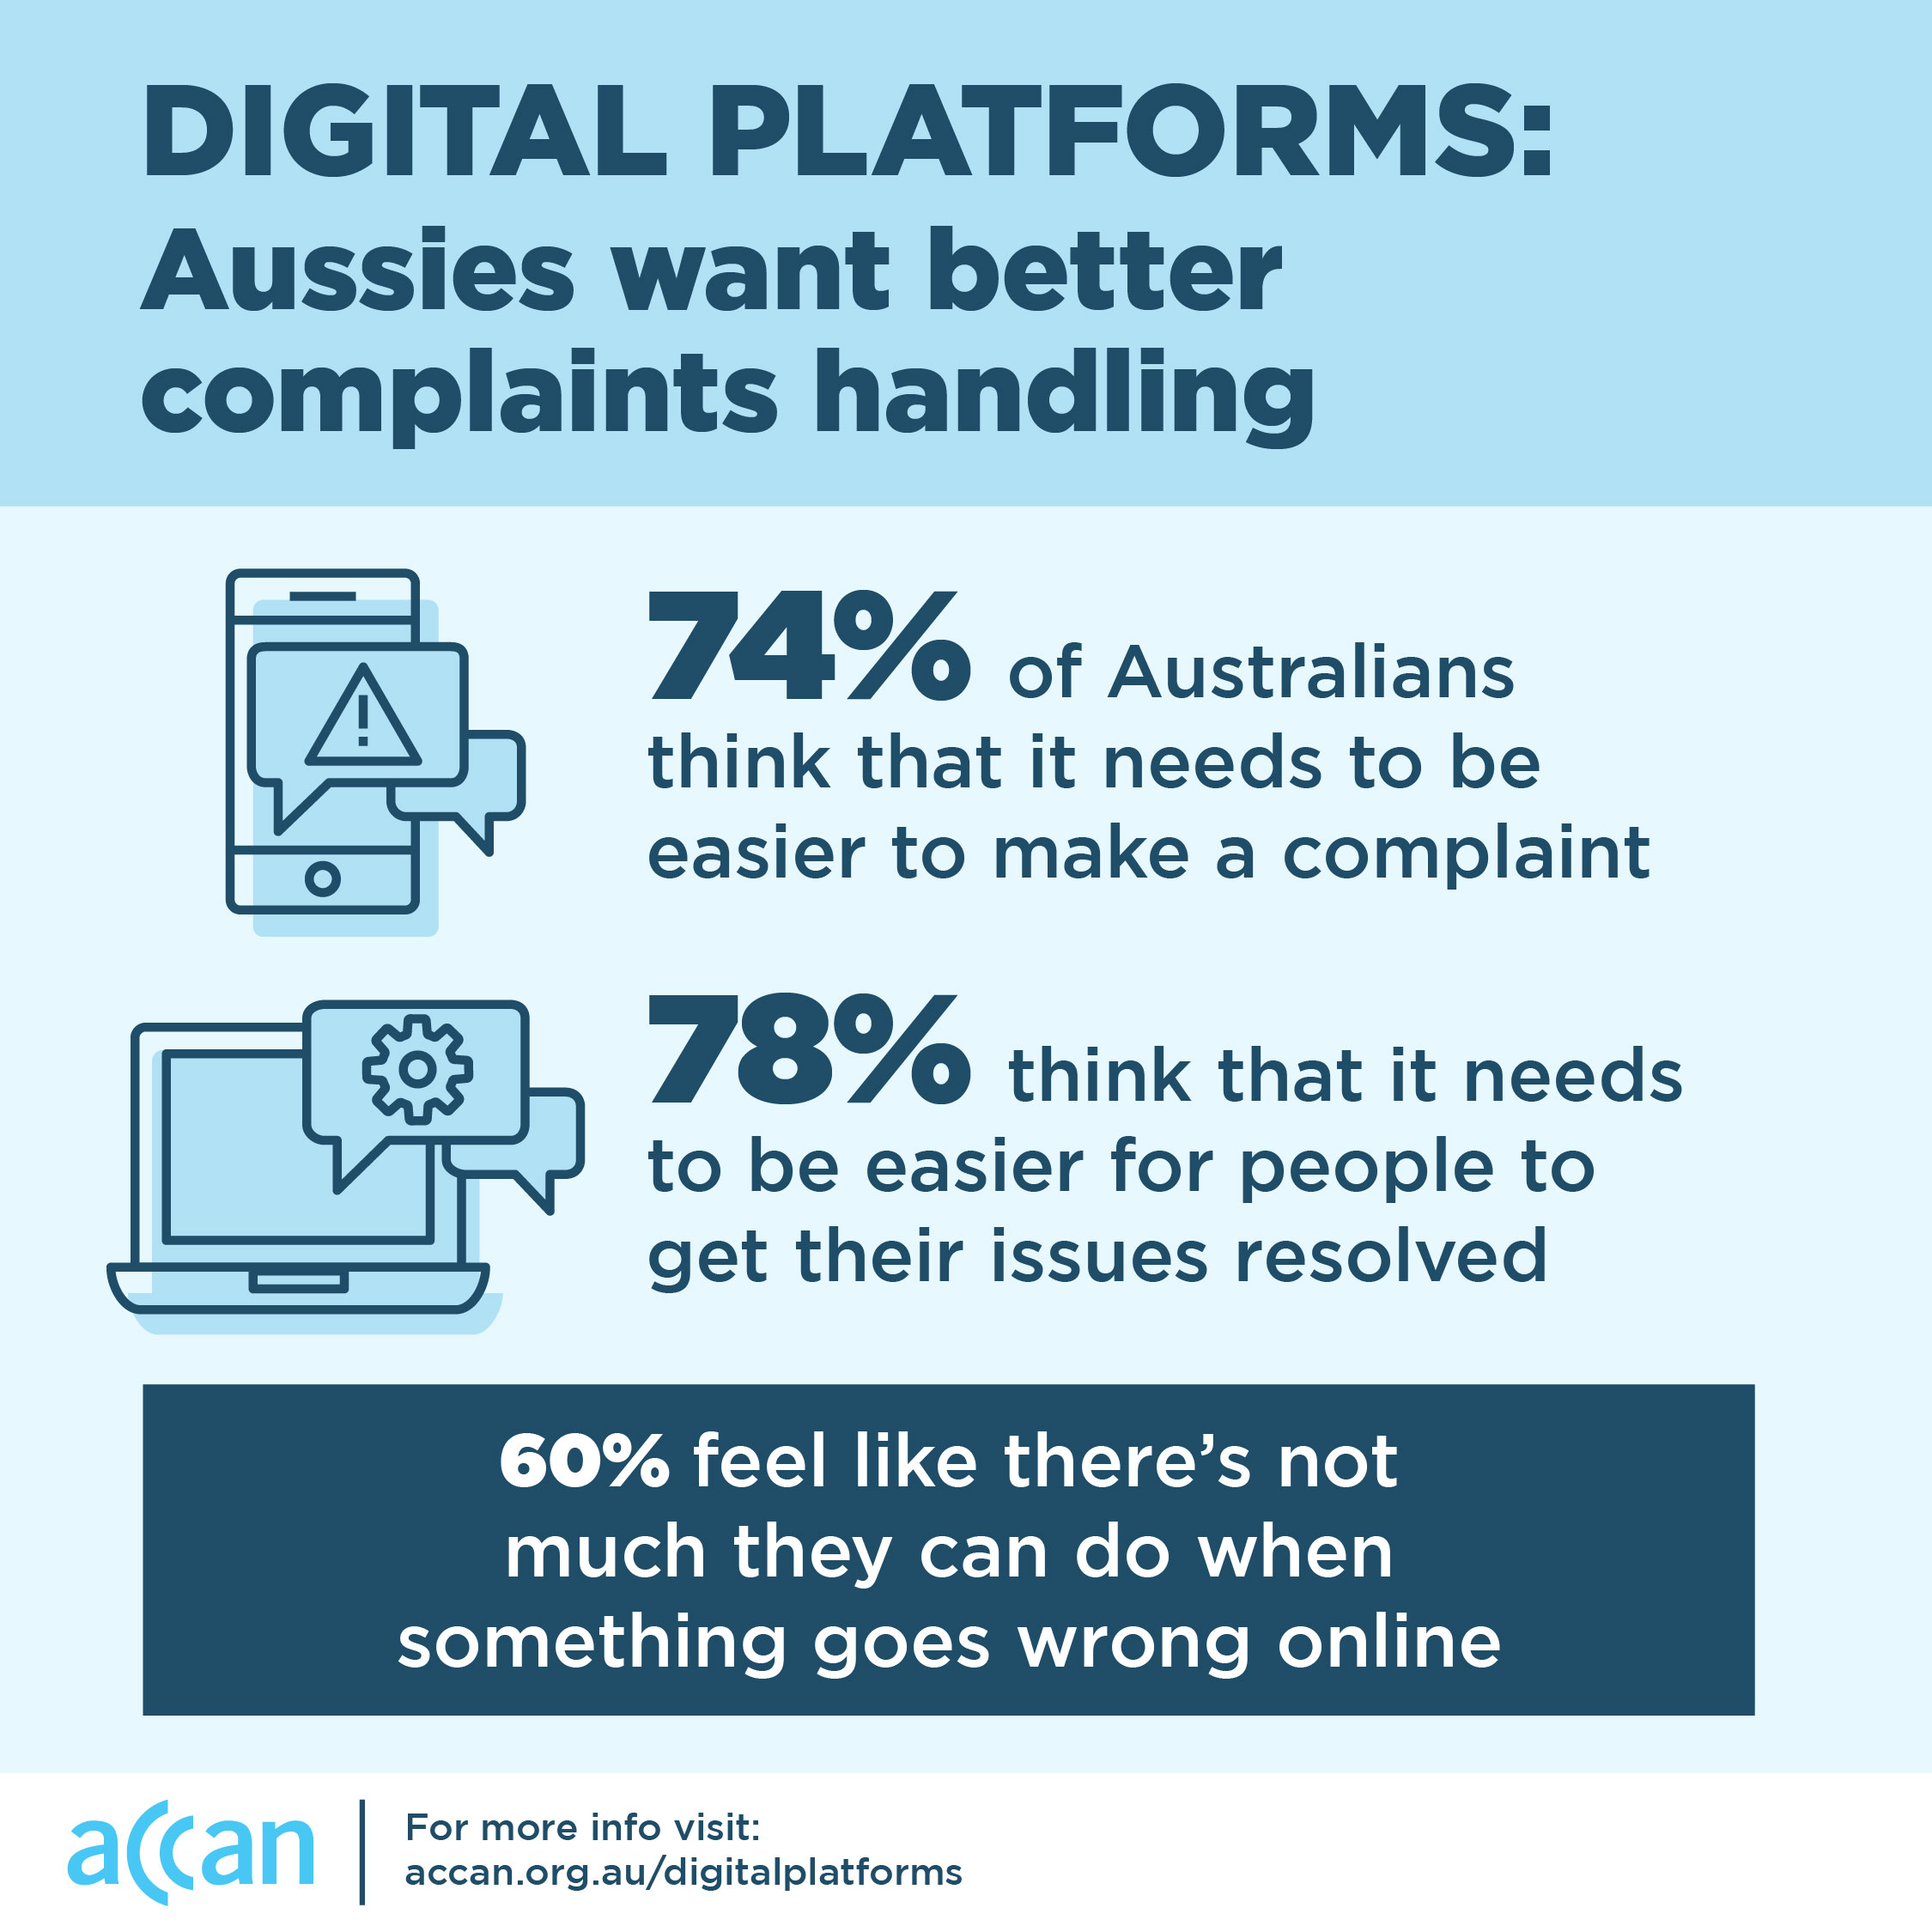 ACCAN Digital Platforms Research complaints handling stats. Text reads: Digital platforms: Aussies want better complaints handling. 74% of Australians think that it needs to be easier to make a complaint. 78% think that it needs to be easier for people to get their issues resovled. 60% feel like there's not much they can do when something goes wrong online.